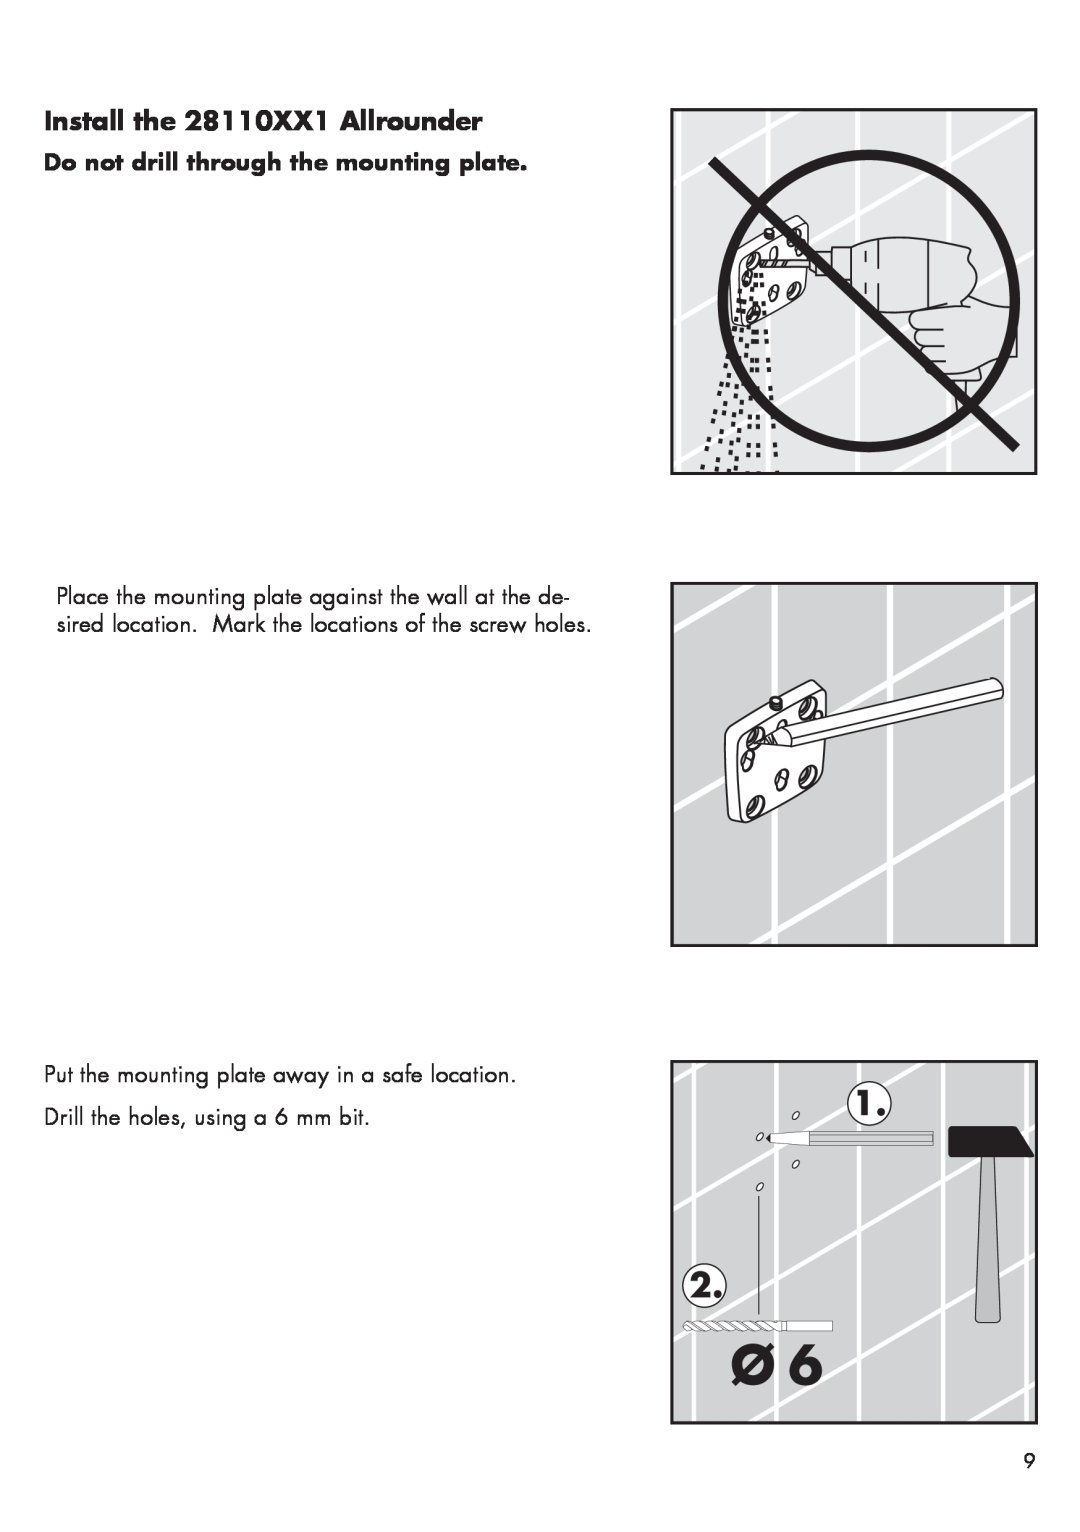 Hans Grohe 2810BXX1 installation instructions Install the 28110XX1 Allrounder, Do not drill through the mounting plate 